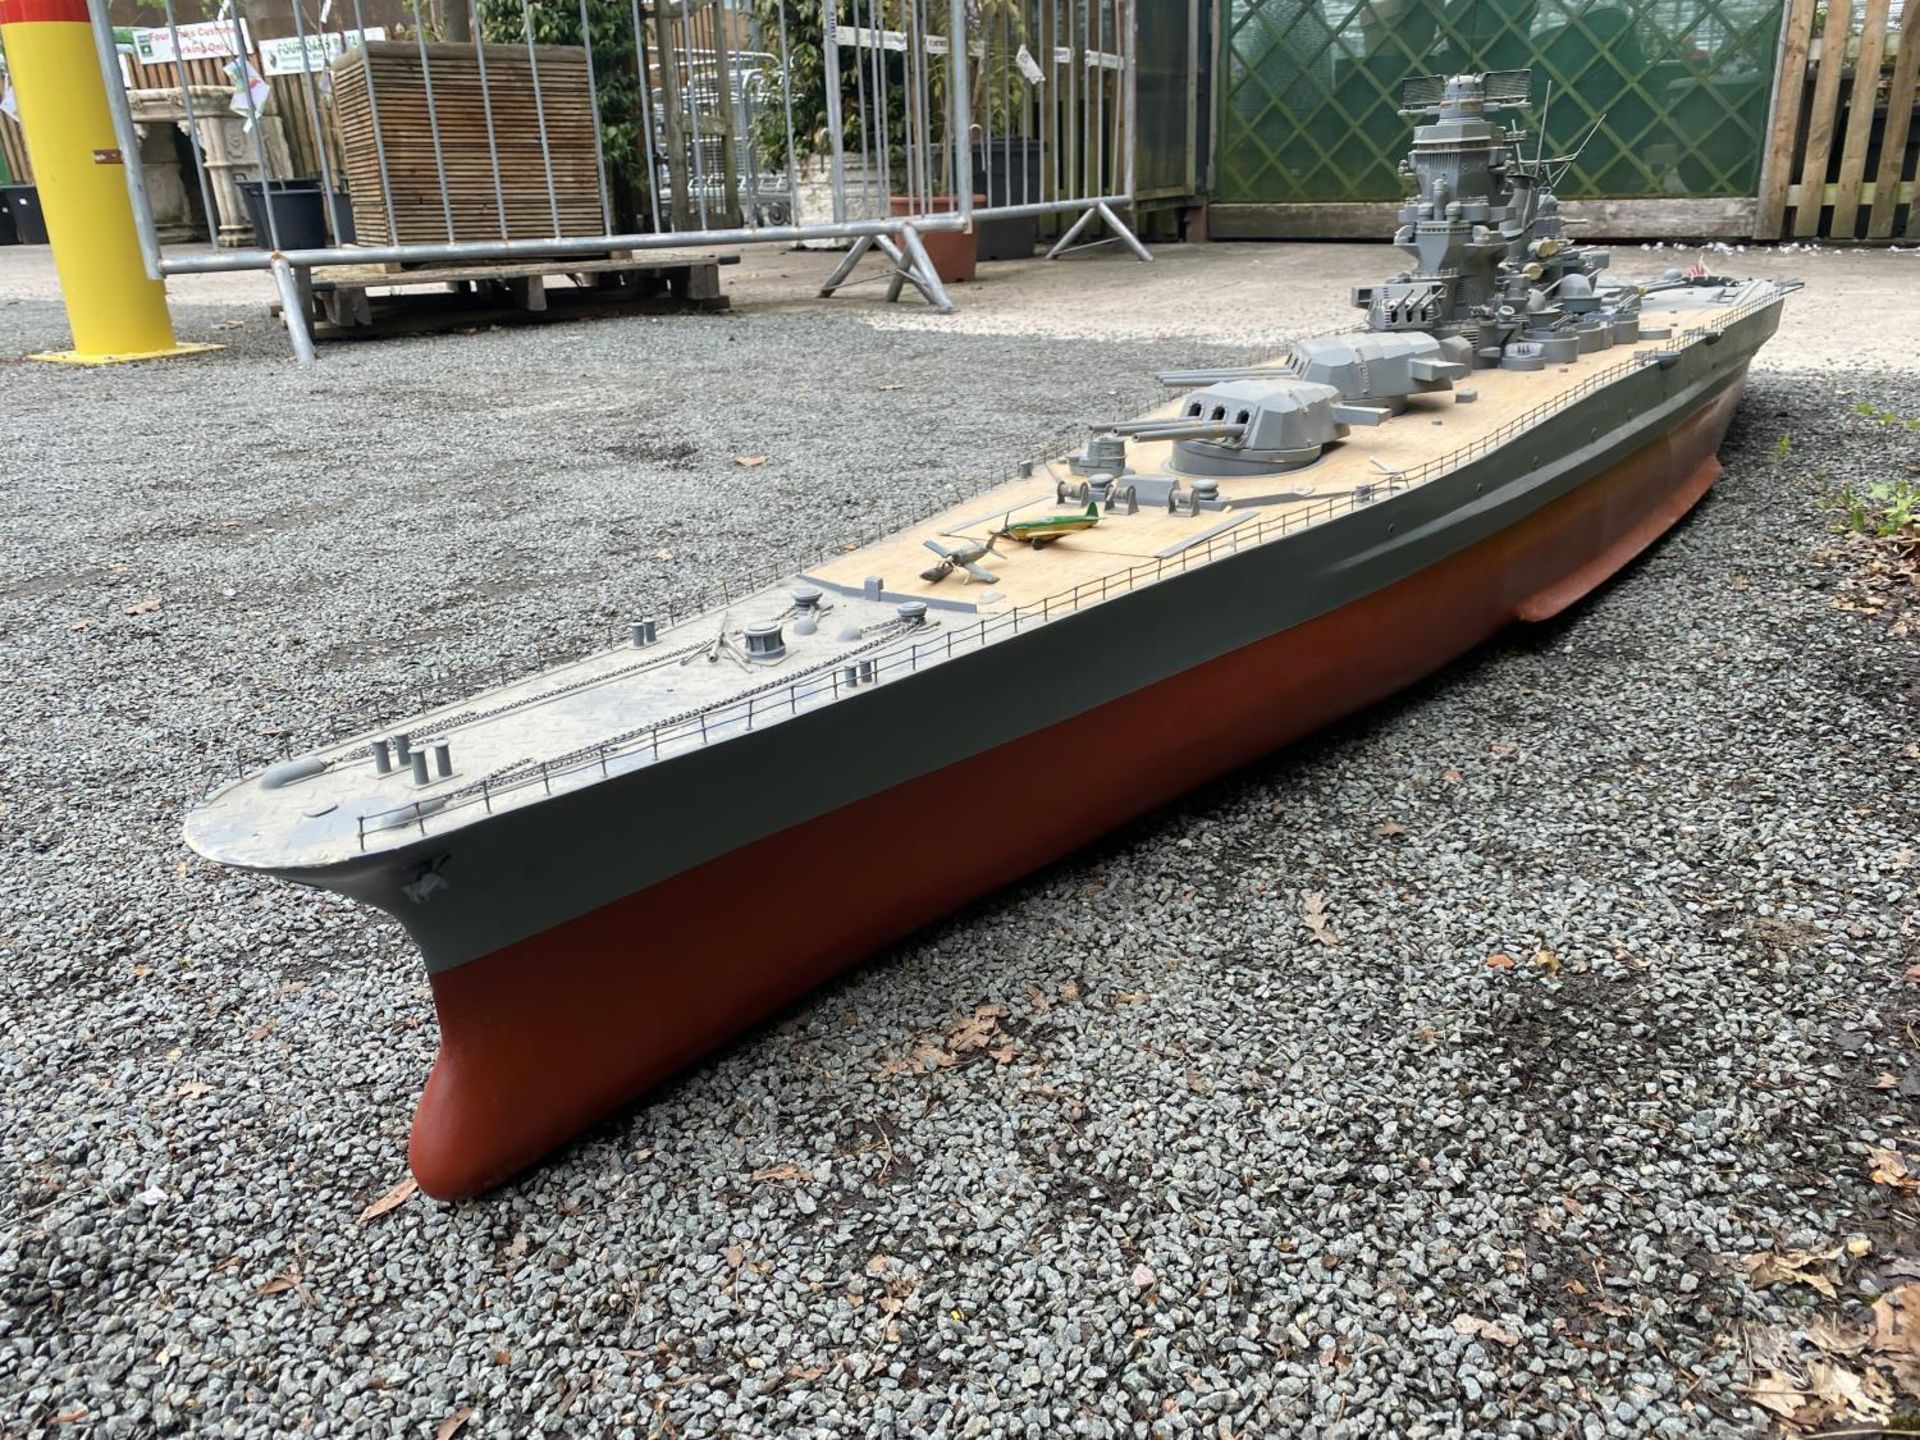 A VERY LARGE MOTORISED REMOTE CONTROLLED MODEL OF WWII JAPANESE MUSASHI / YAMATO WAR SHIP WITH - Image 33 of 42